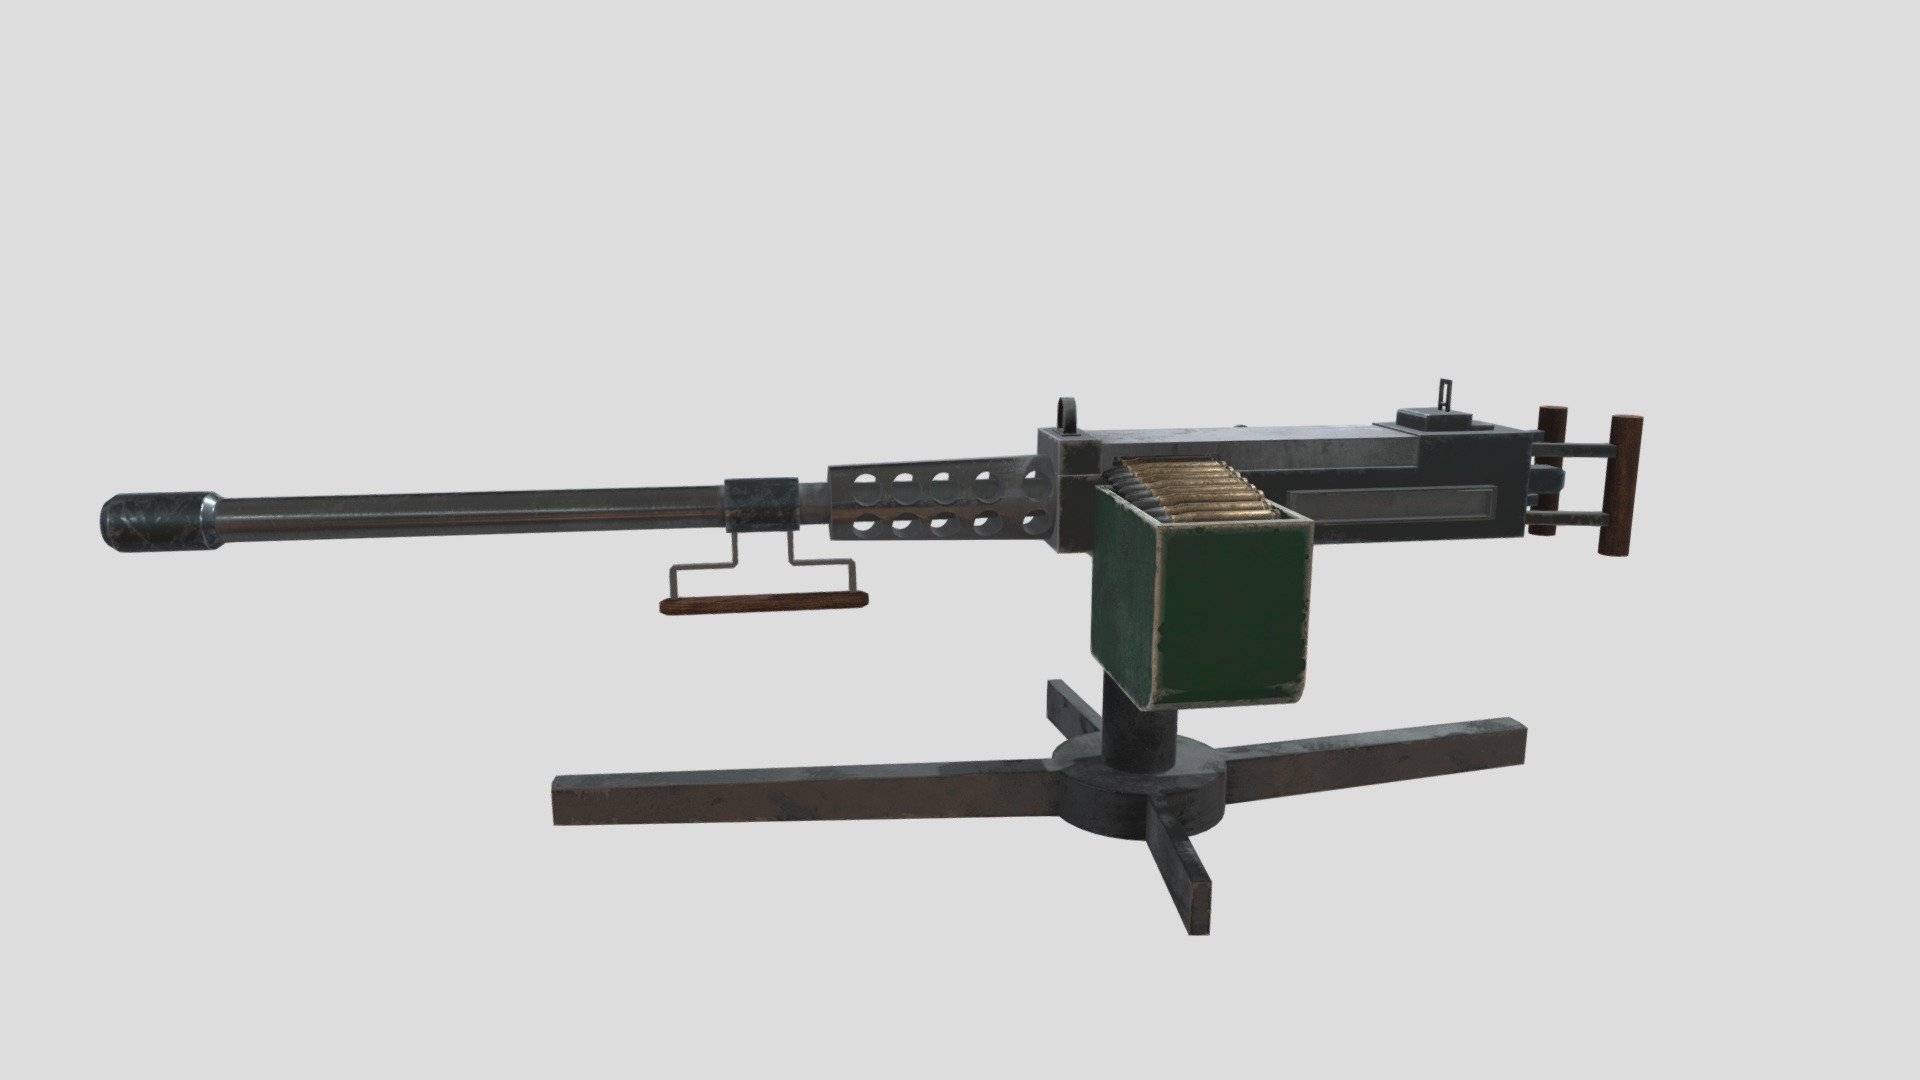 The M2 Browning machine gun was first conceived in 1918, as a request by General John Pershing of the AEF for a large-caliber antiaircraft and antitank machine gun. John Browning scaled his M1917 water-cooled .30 caliber design up to .50 caliber, and the first prototypes were test fired in November of 1918. Impetus behind the project faltered after the Armistice, but Colt continued to develop the gun during the 1920s and 1930s. It was first adopted in 1922 by the US Coastal Artillery as an antiaircraft gun, but significant manufacture would not come until World War Two. By this time, the gun's main role had shifted, from antitank to being an aircraft armament, and some 2 million were made during World War Two, primarily as aircraft guns.

The M2 remains in service today, highlighting the brilliance and longevity of John Browning's designs 3d model